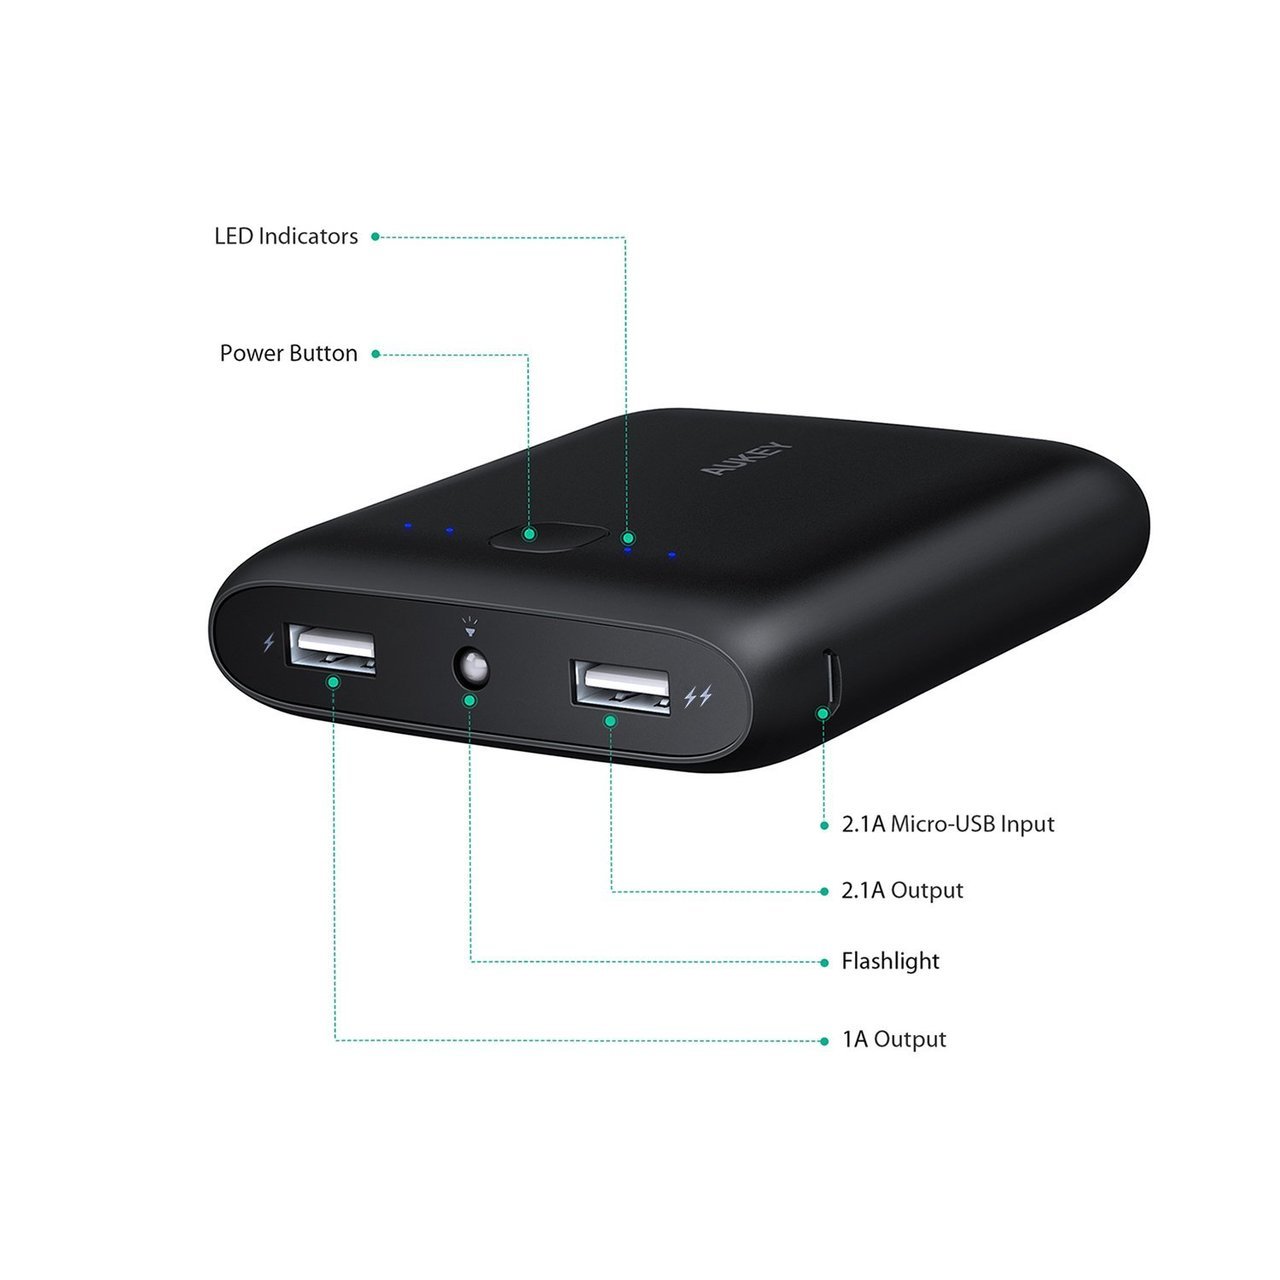 AUKEY 10000mAh Dual USB Powerbank with Fast Charging Enabled